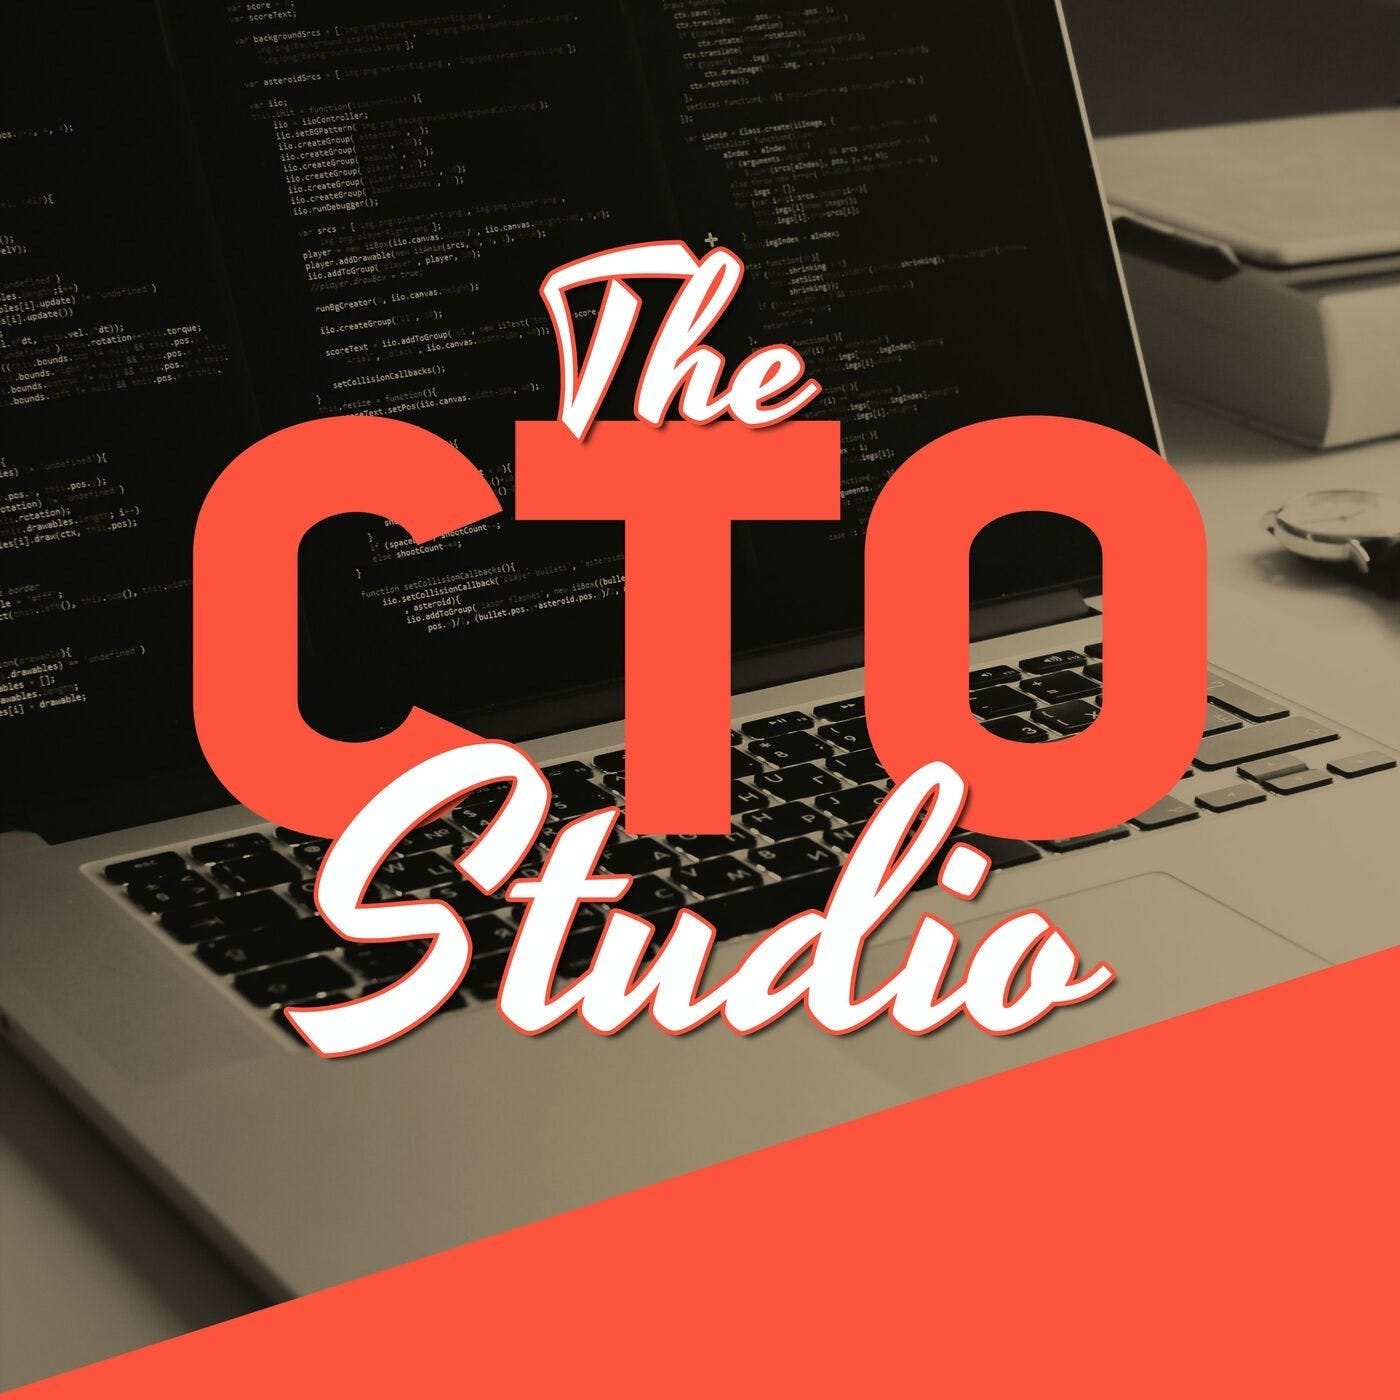 The Role of the CTO has shifted beyond just Technology